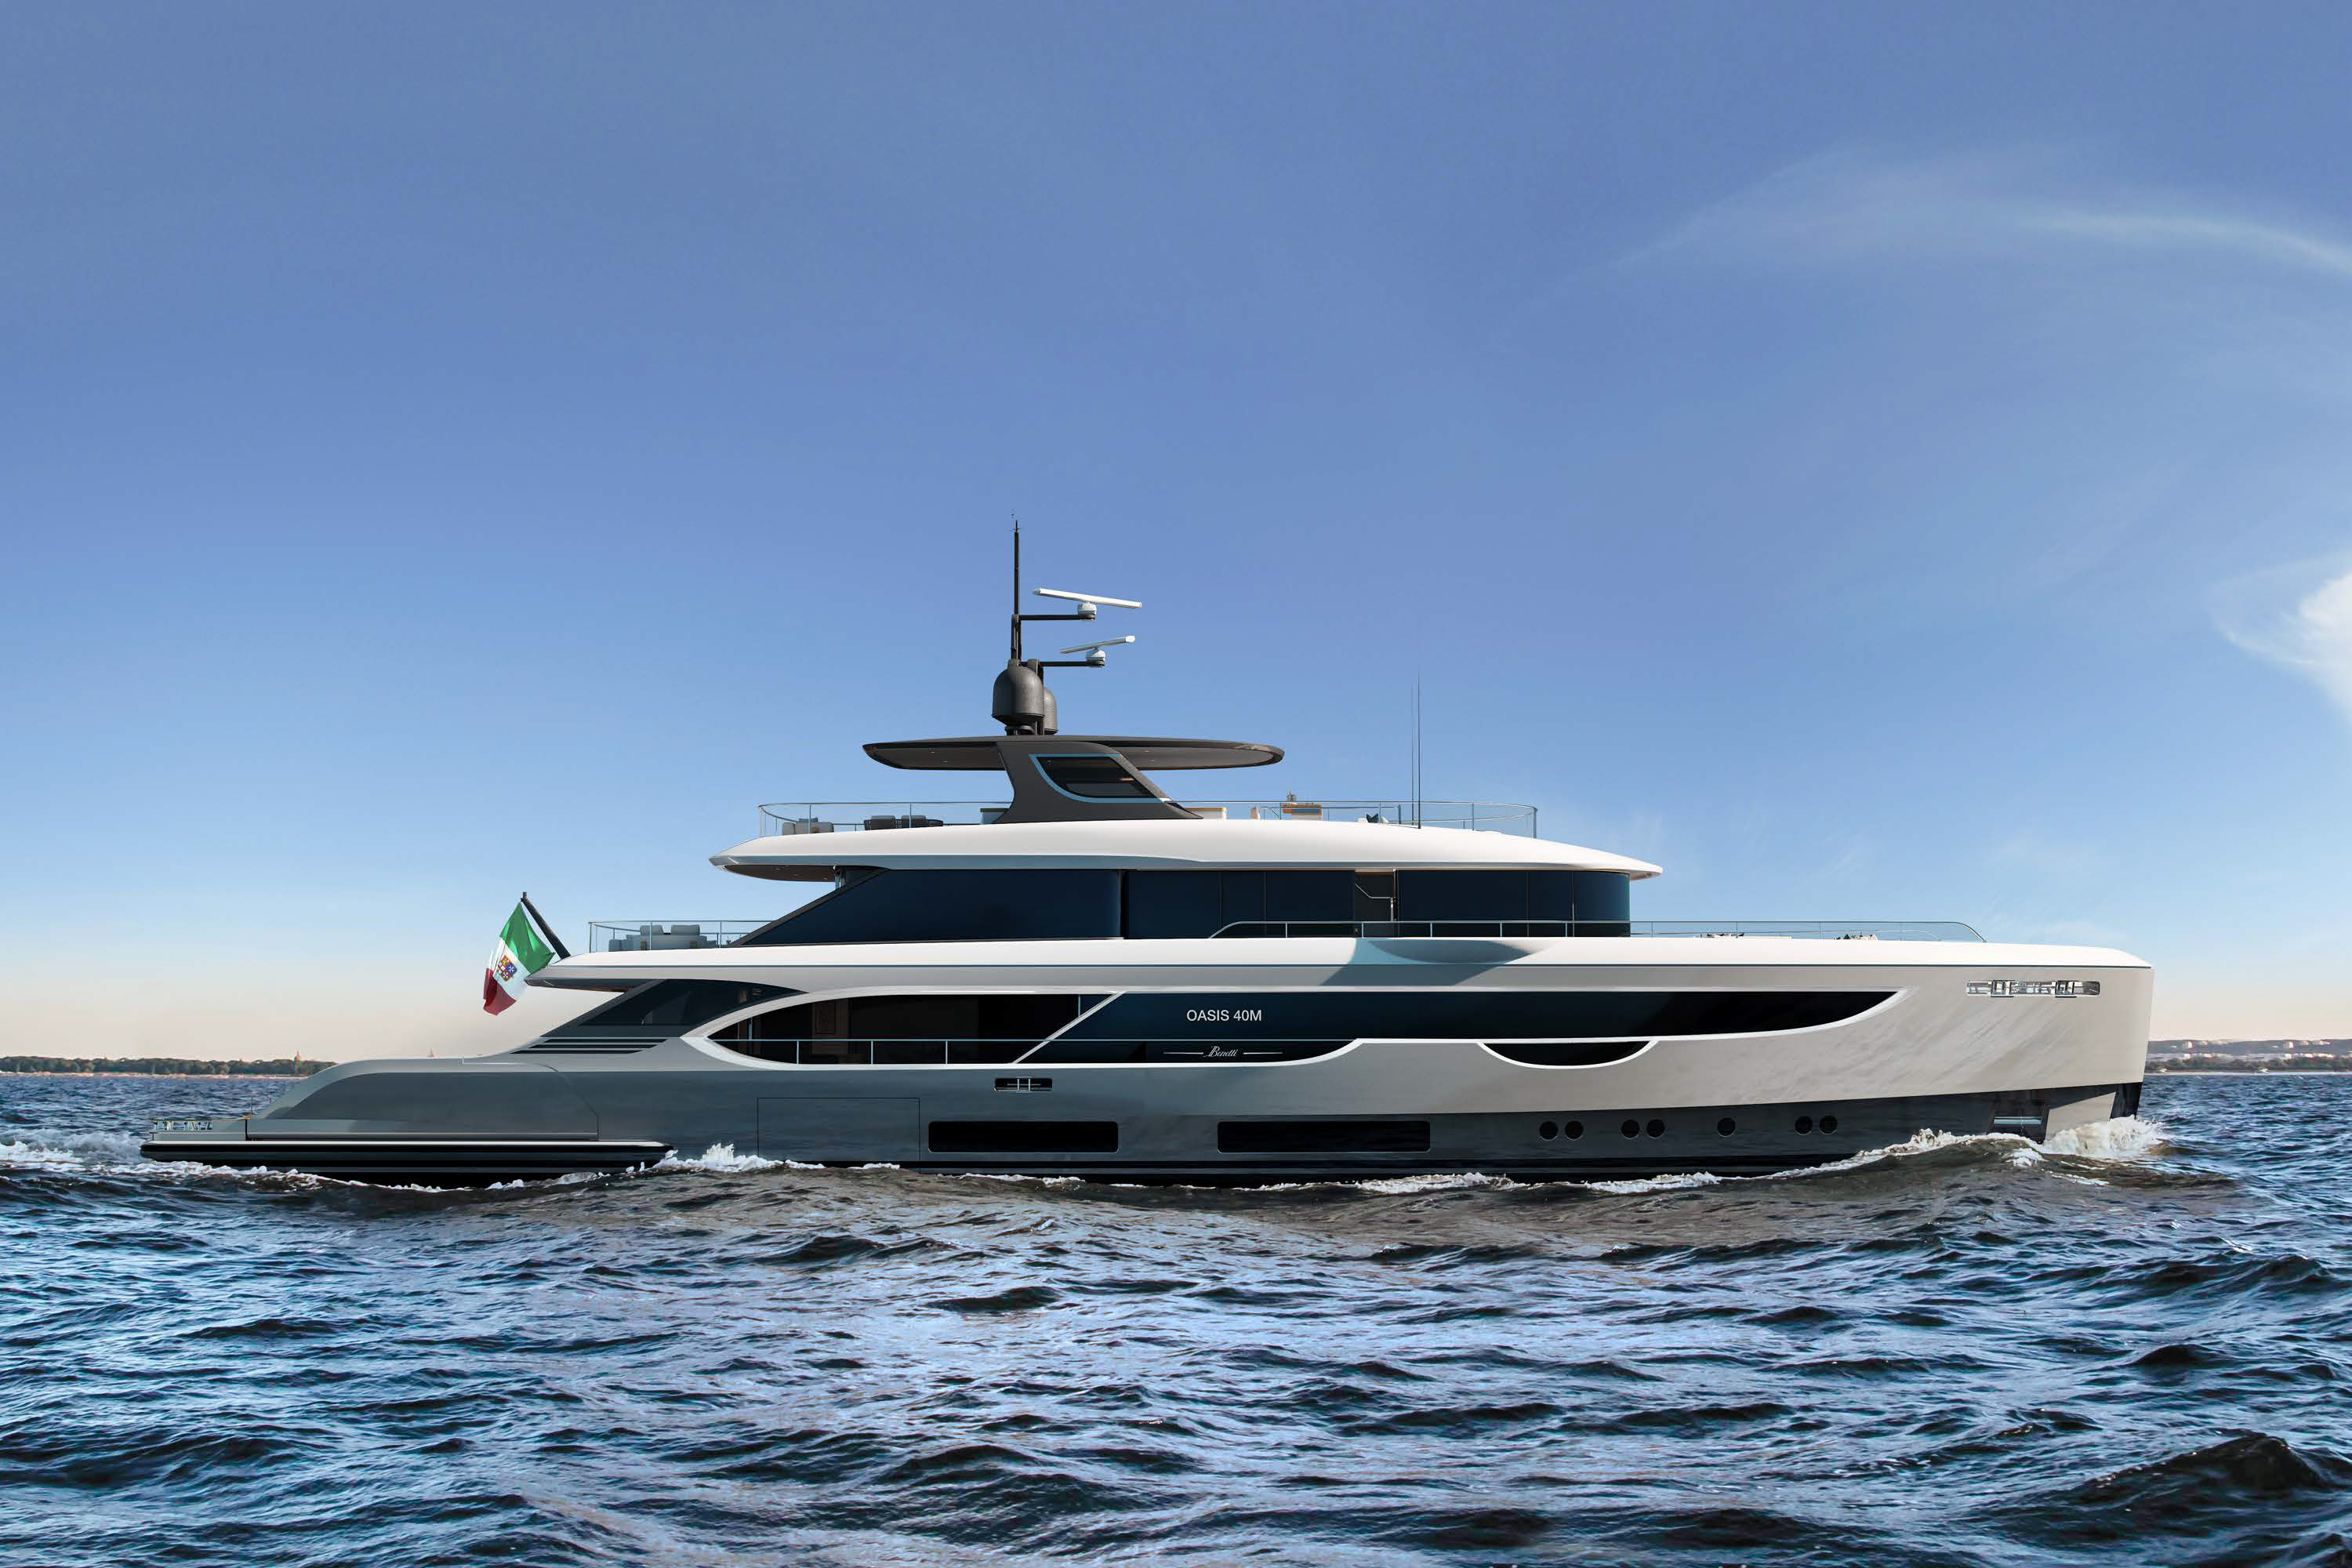 BENETTI OASIS BO101 specs with detailed specification and builder summary